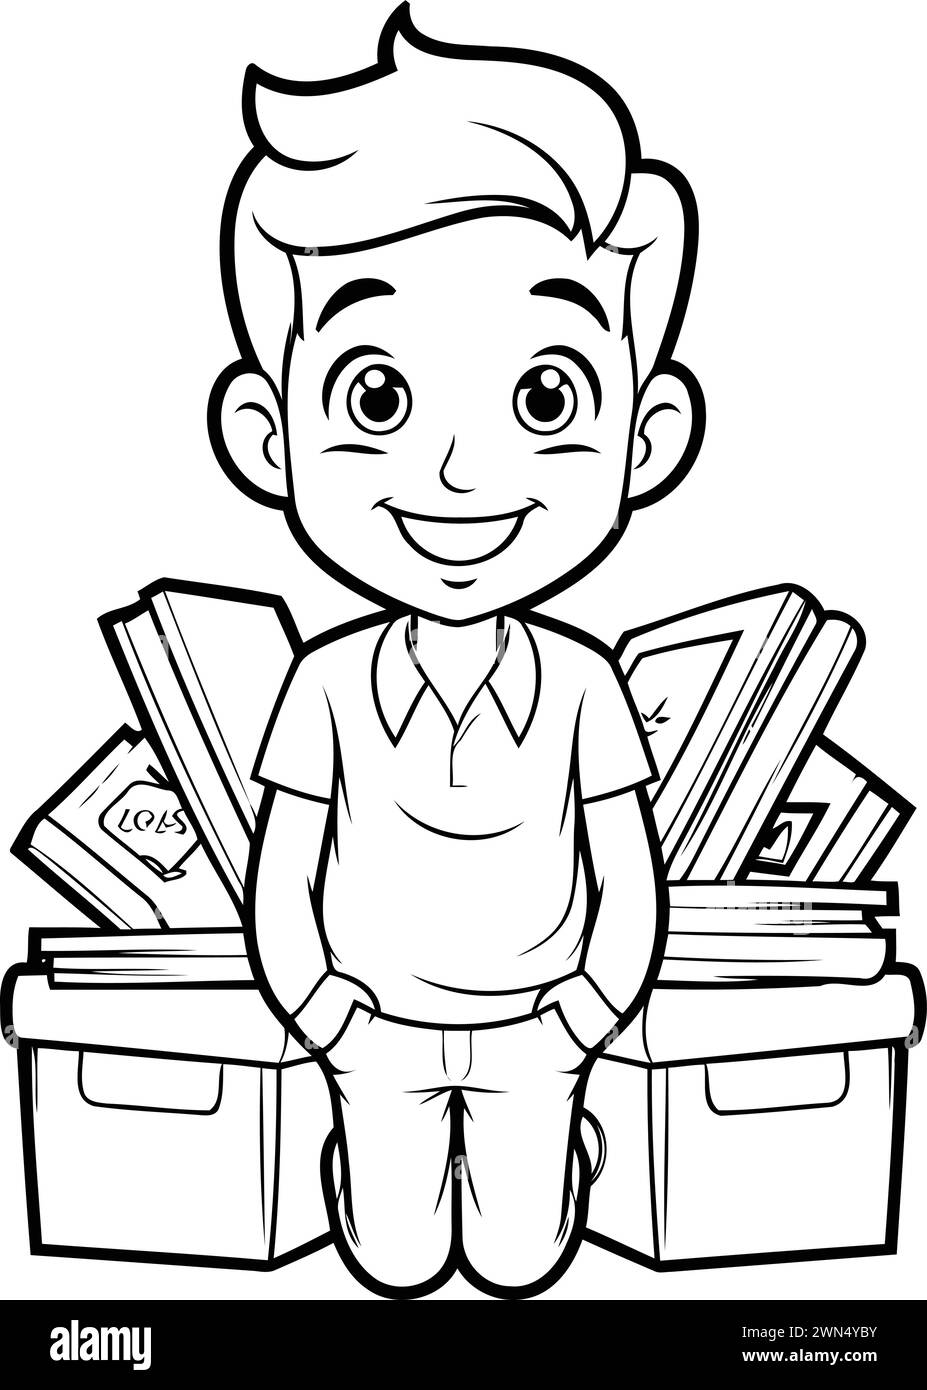 Black and White Cartoon Illustration of a Kid Boy with Money Boxes for ...